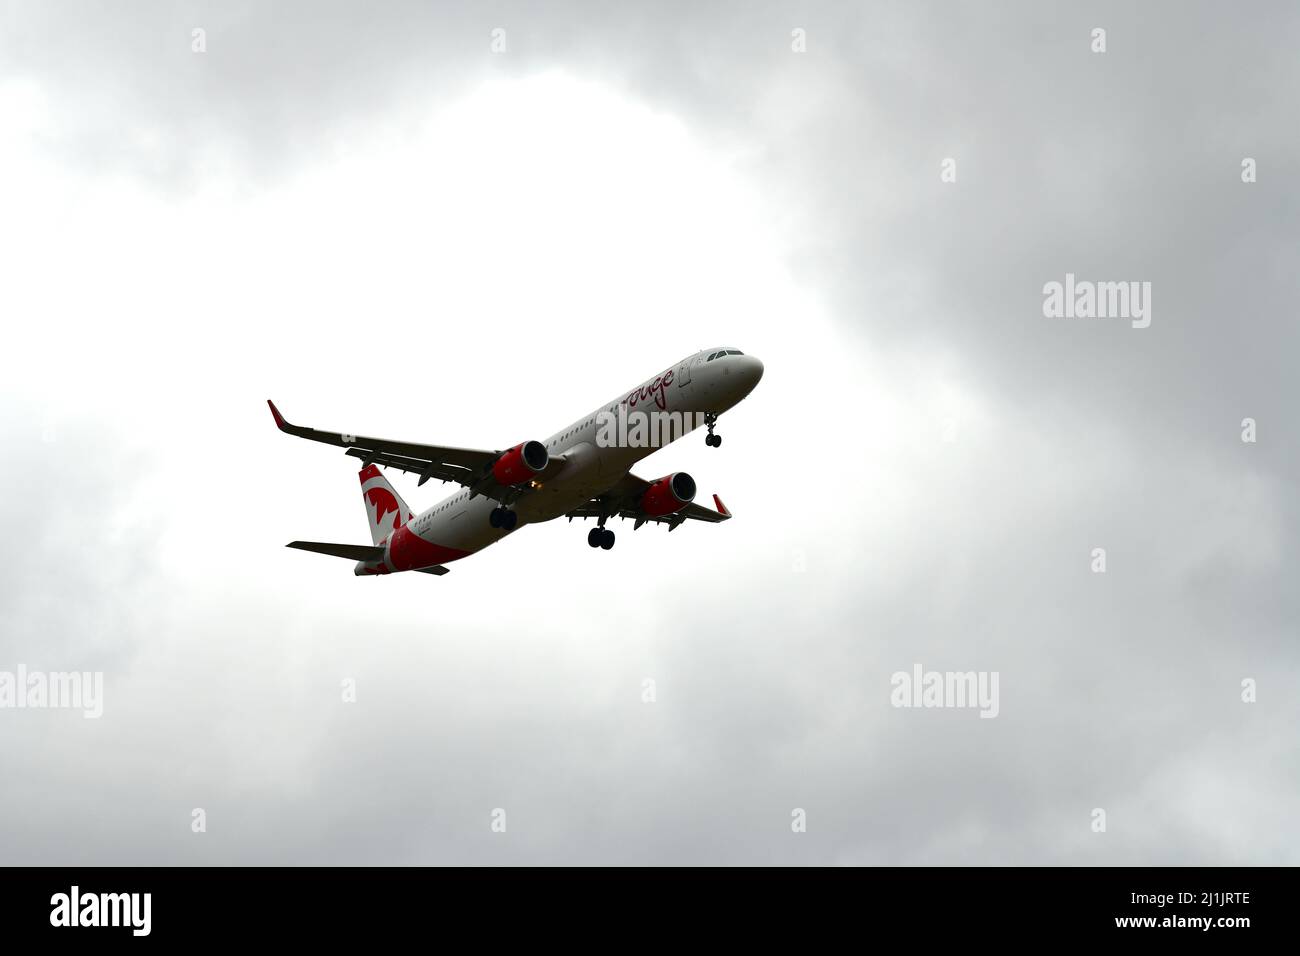 A passenger airplane lands at Pearson international airport in Toronto Canada in cloudy weather Stock Photo